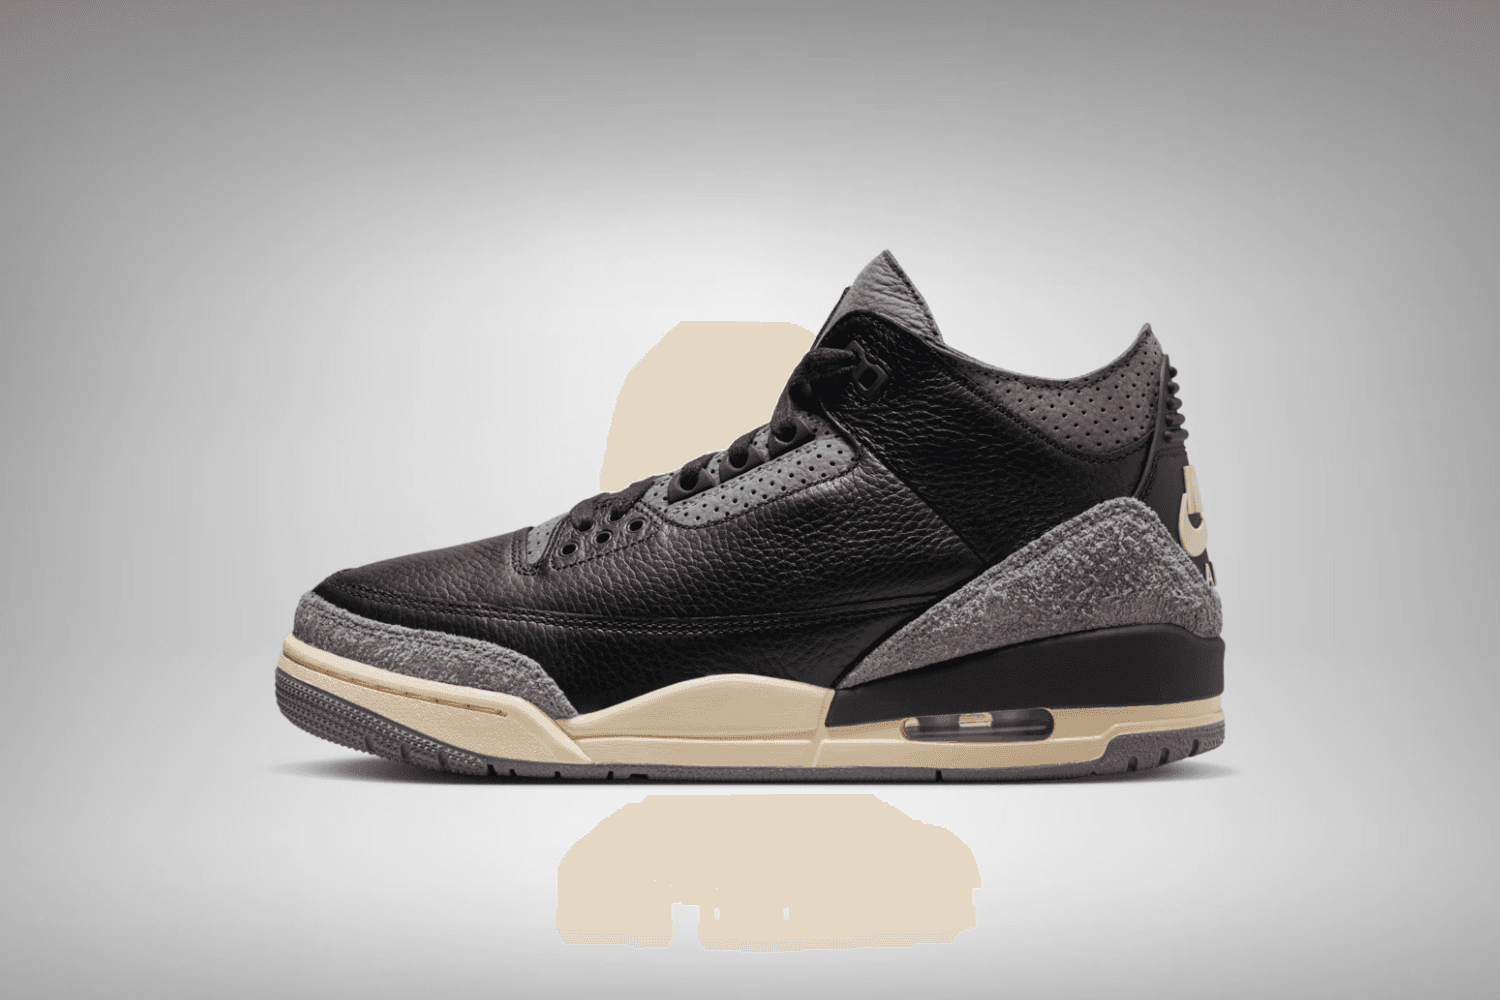 Official images of the A Ma Maniére x Air Jordan 3 in 'Black'